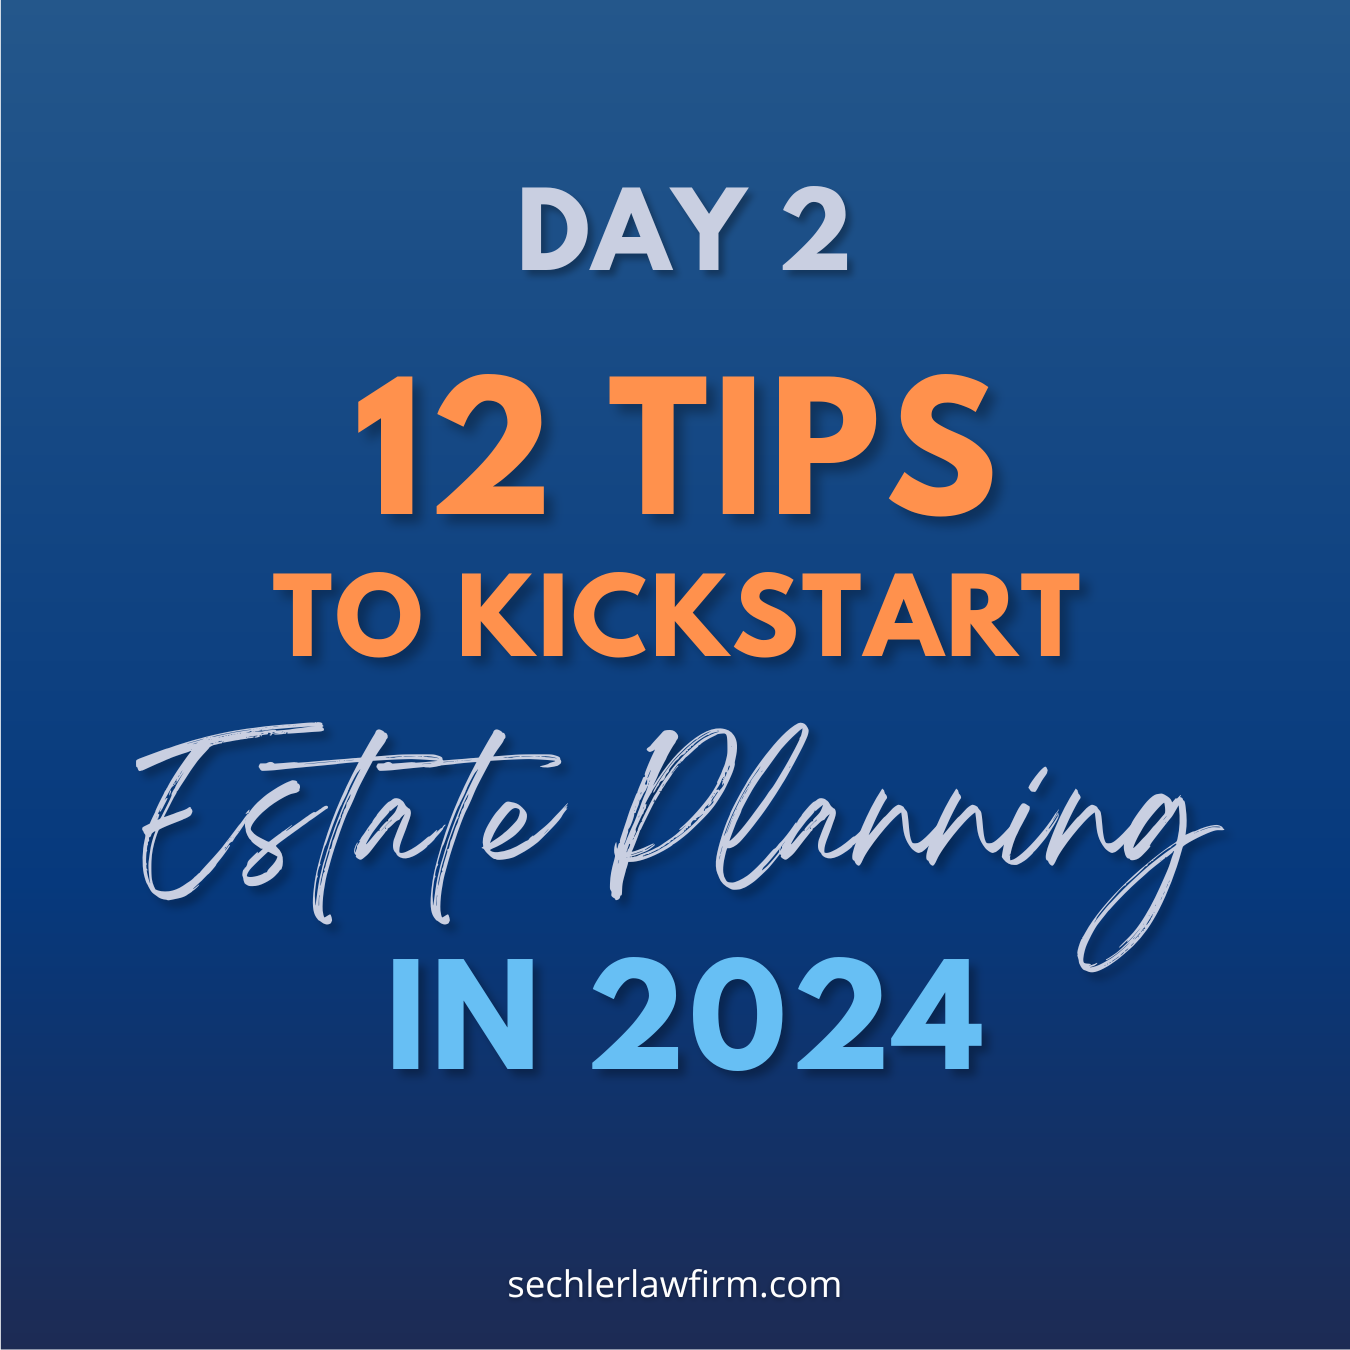 12 Tips to Kickstart your Estate Planning for 2024 – Day 2